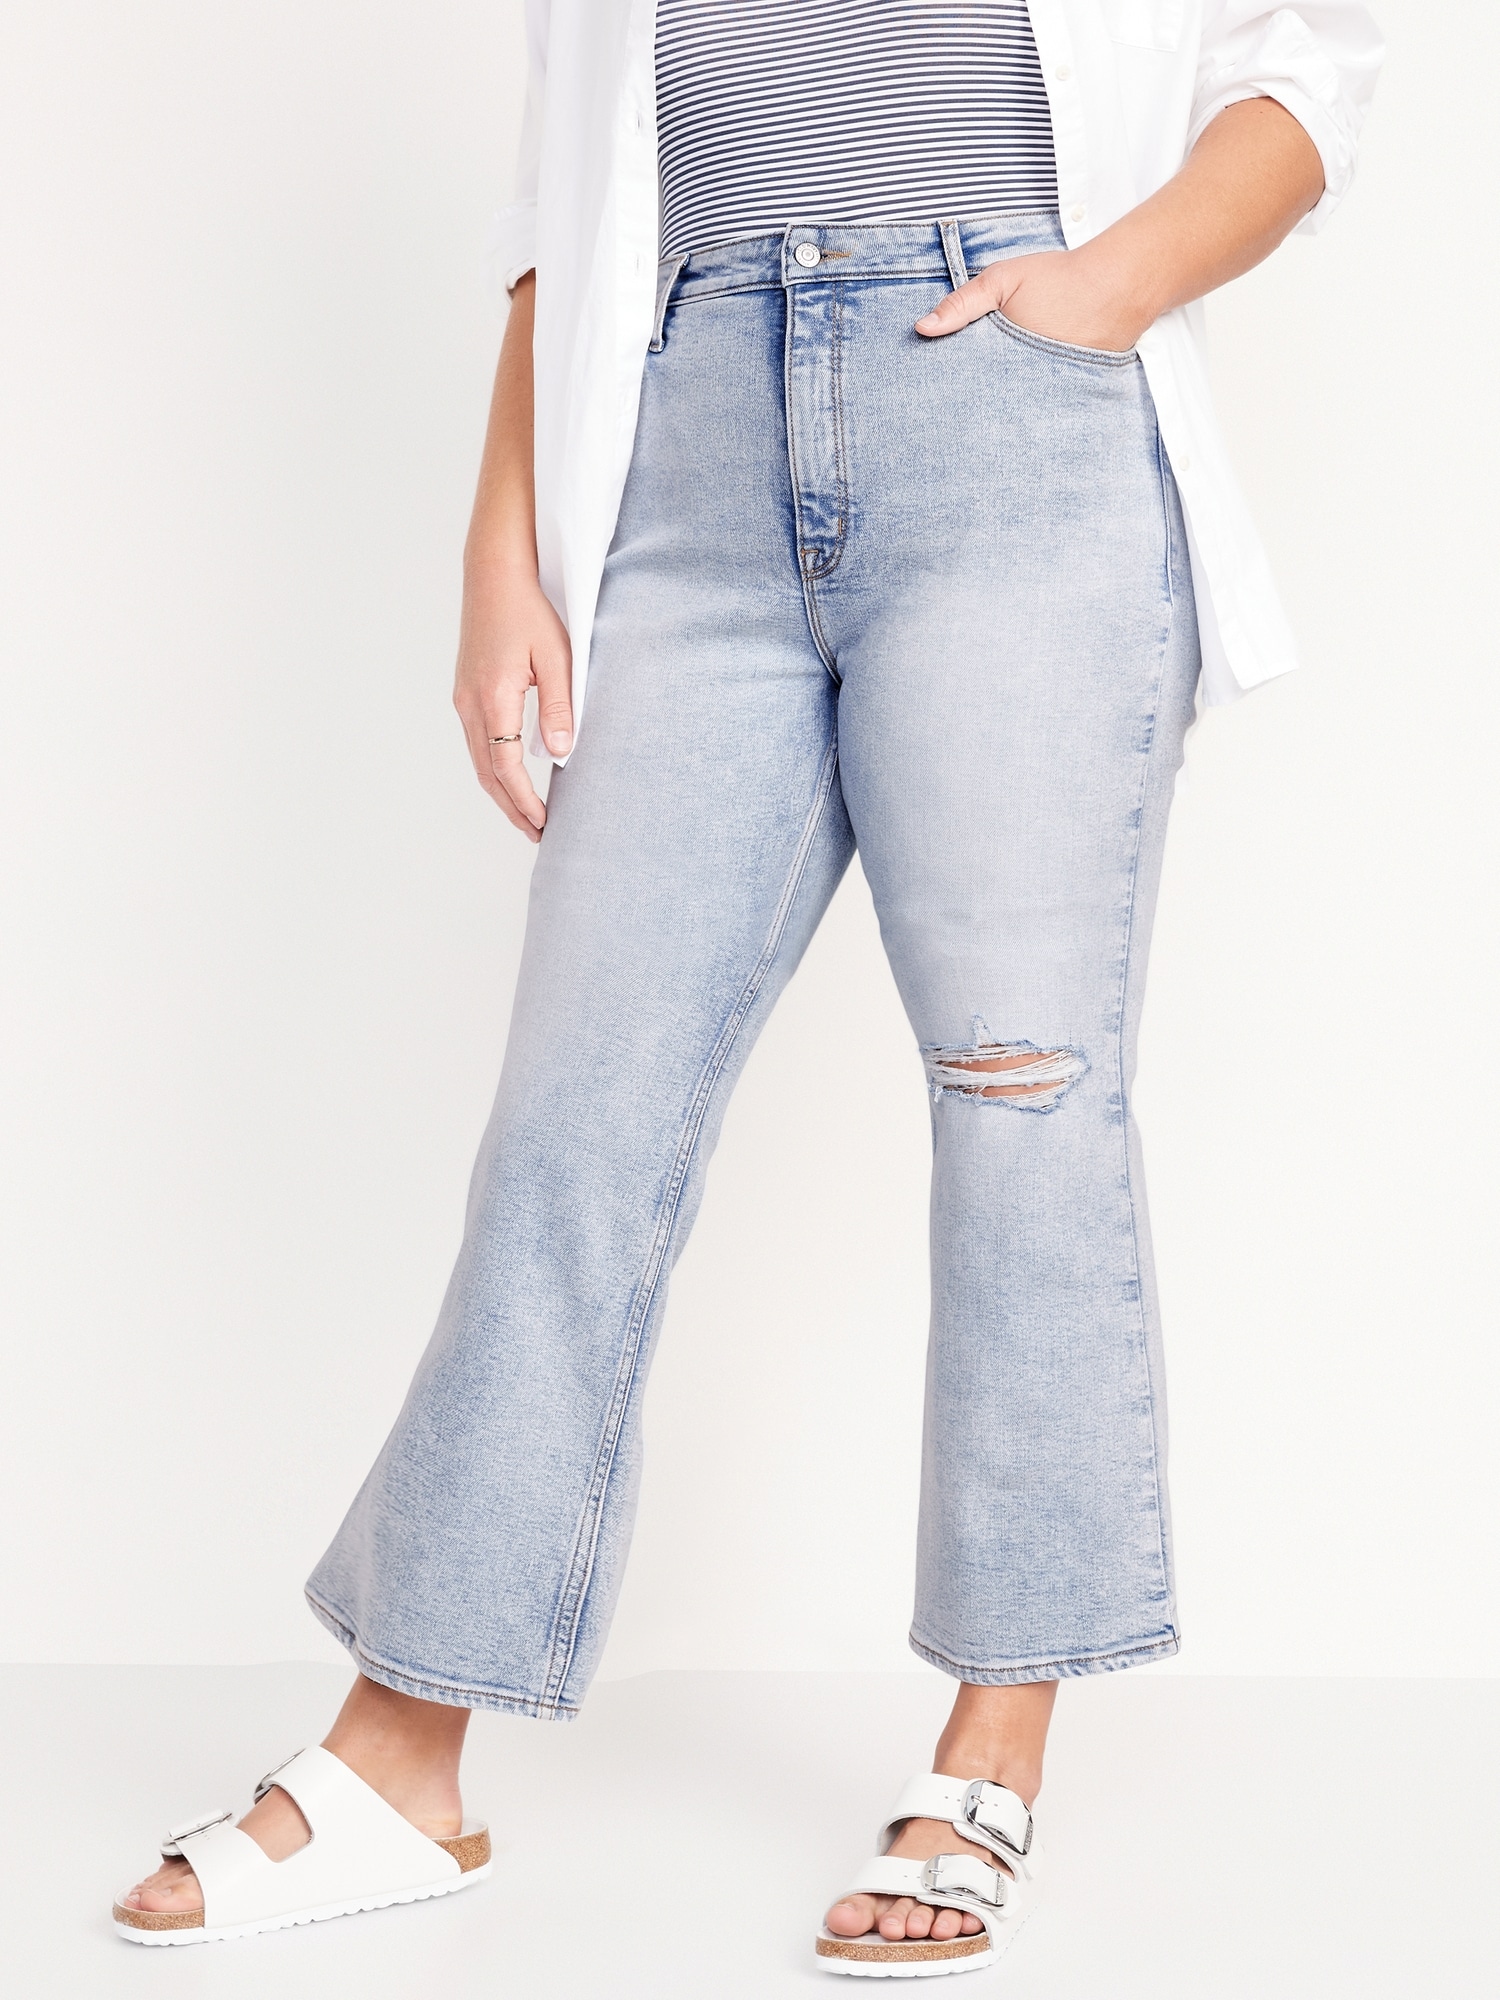 Old Navy Higher High-Waisted Cut-Off Flare Jeans for Women